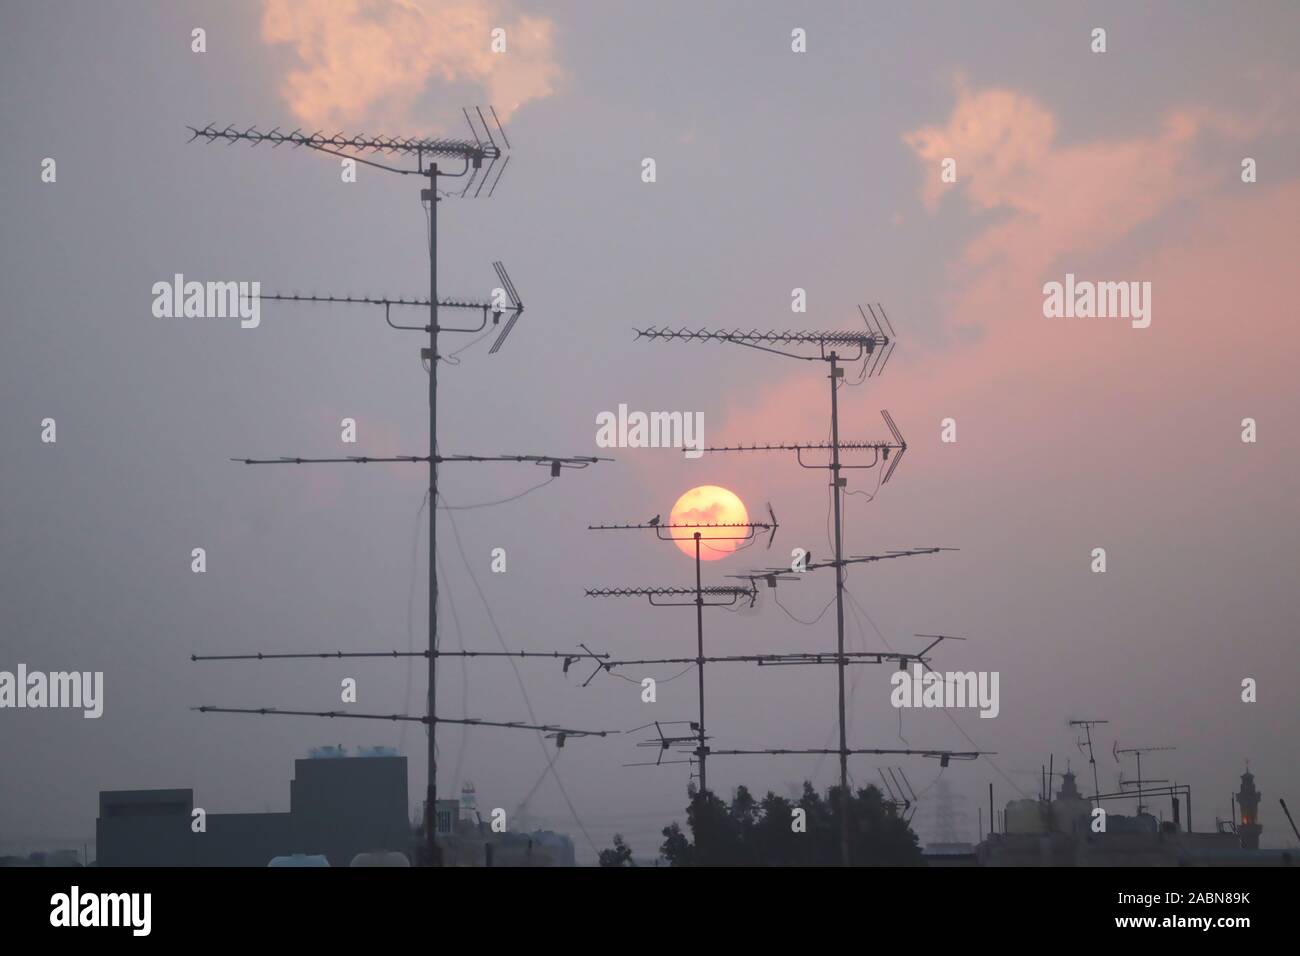 Television antenna silhouetted against a setting sun Stock Photo